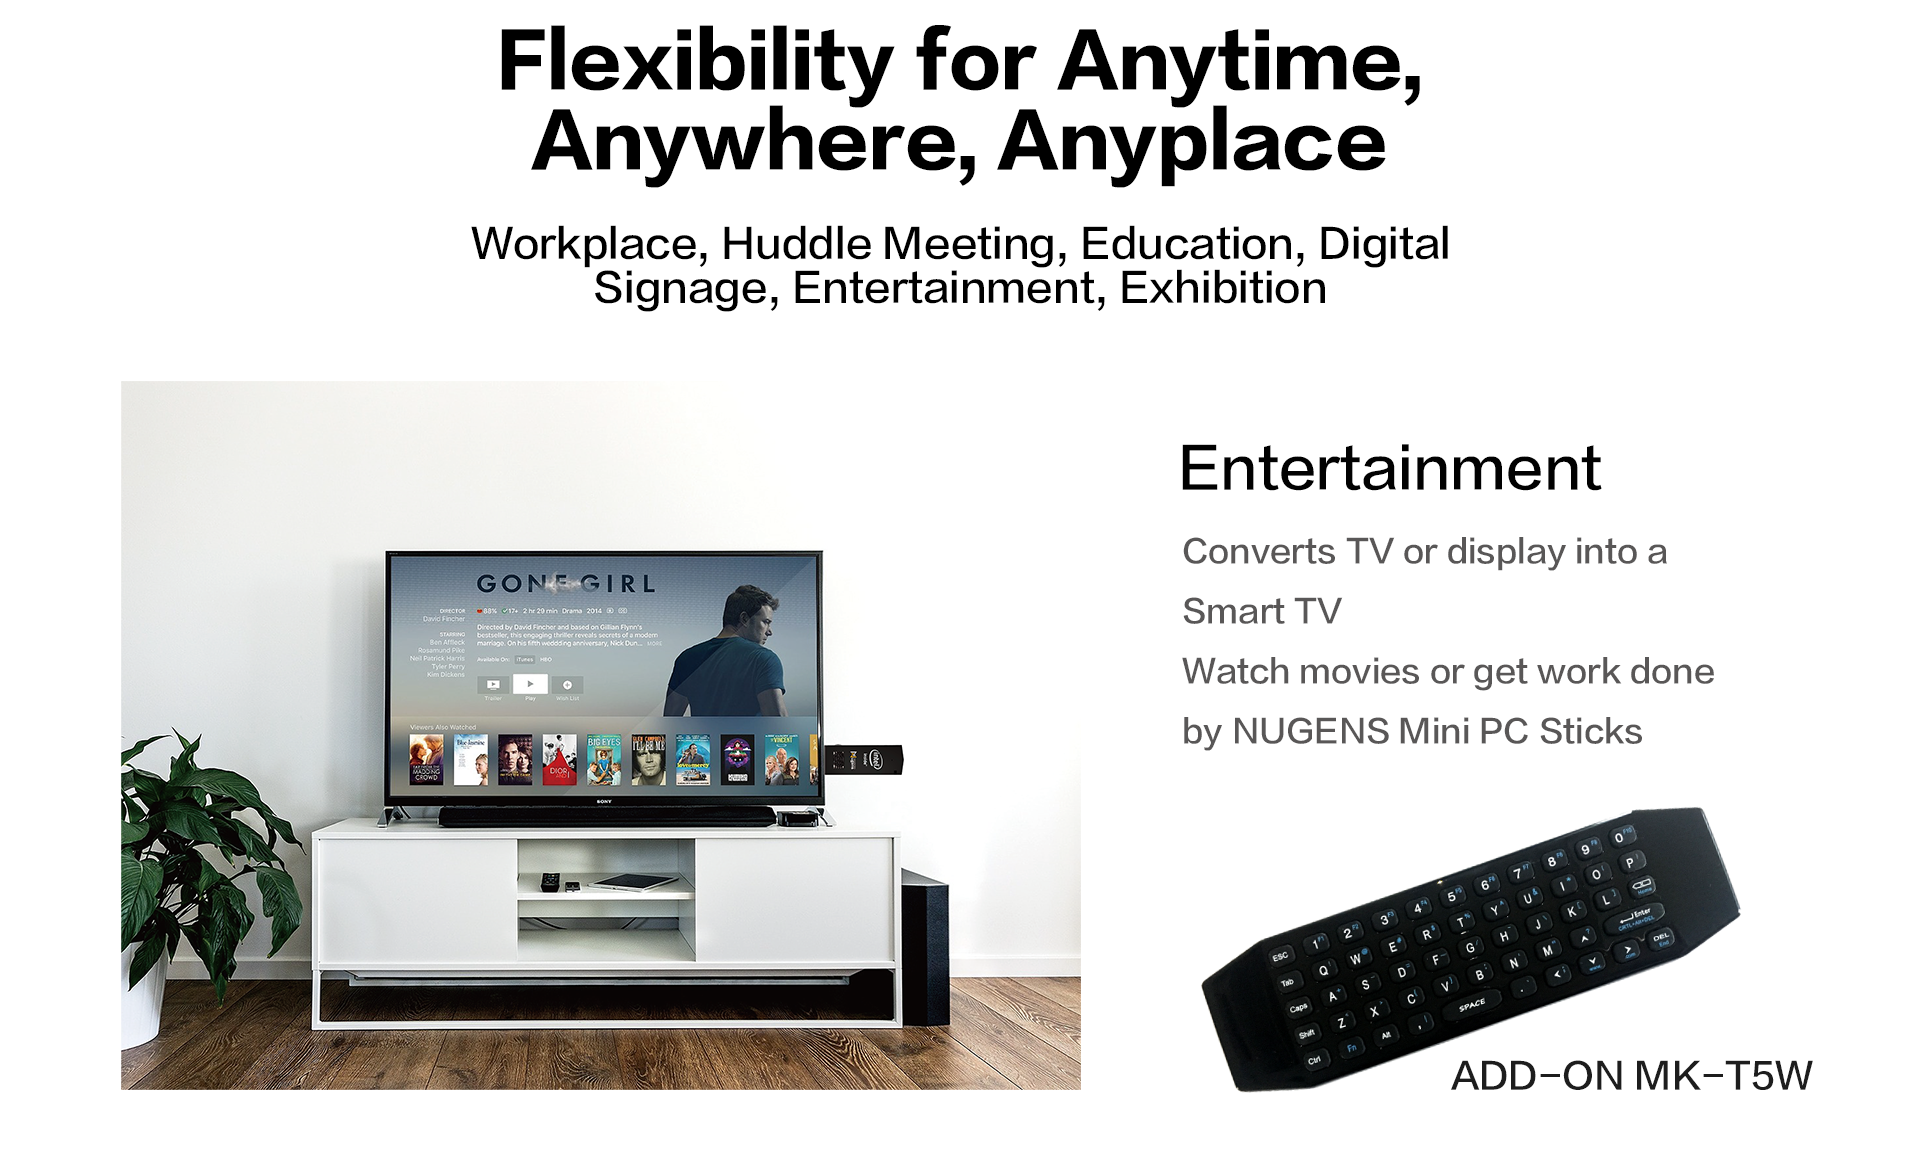 Converts TV or display into a Smart TV Watch movies or get work done by NUGENS Mini PC Sticks